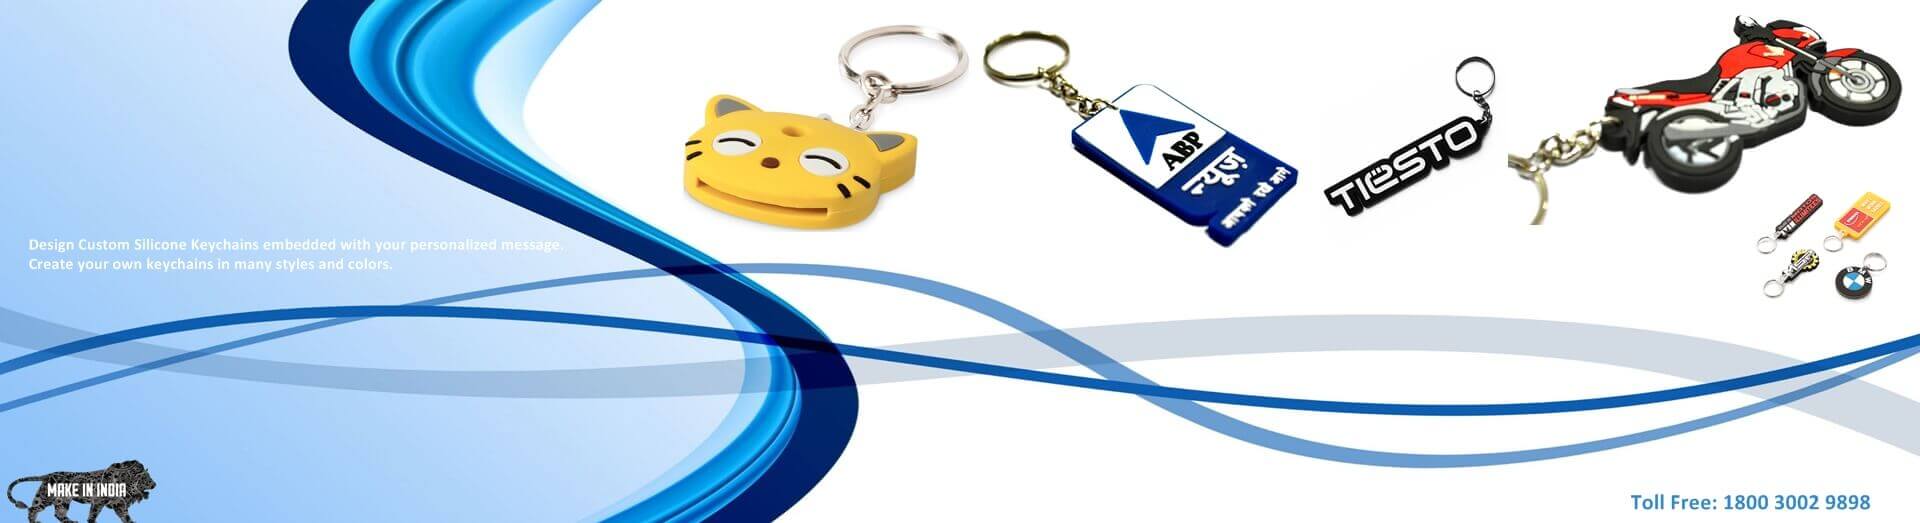 Rubber Keychain Manufacturer in Ahmedabad,Keychain in Ahmedabad,Keychain Manufacturer in Banglore,Promotional Keychain in Ahmedabad,Customized Keychain in Banglore,Keychain Wholesaler in Ahmedabad 